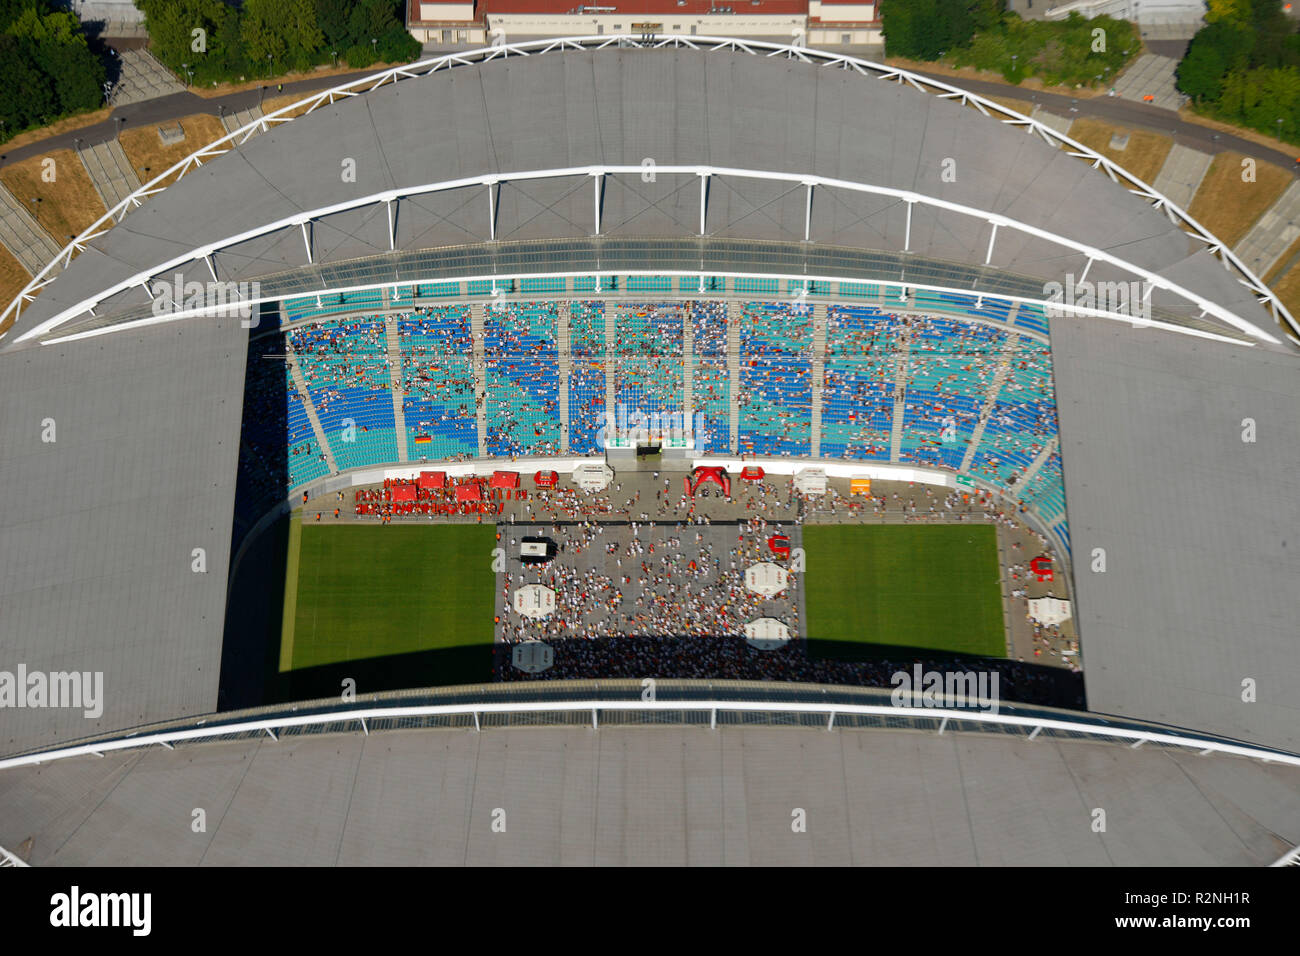 Aerial View, Zentralstadion, Elsterbecken, Public Viewing in the Stadium, Aerial View, Cottaweg 4, Leipzig, Saxony, Germany, Europe, Stock Photo